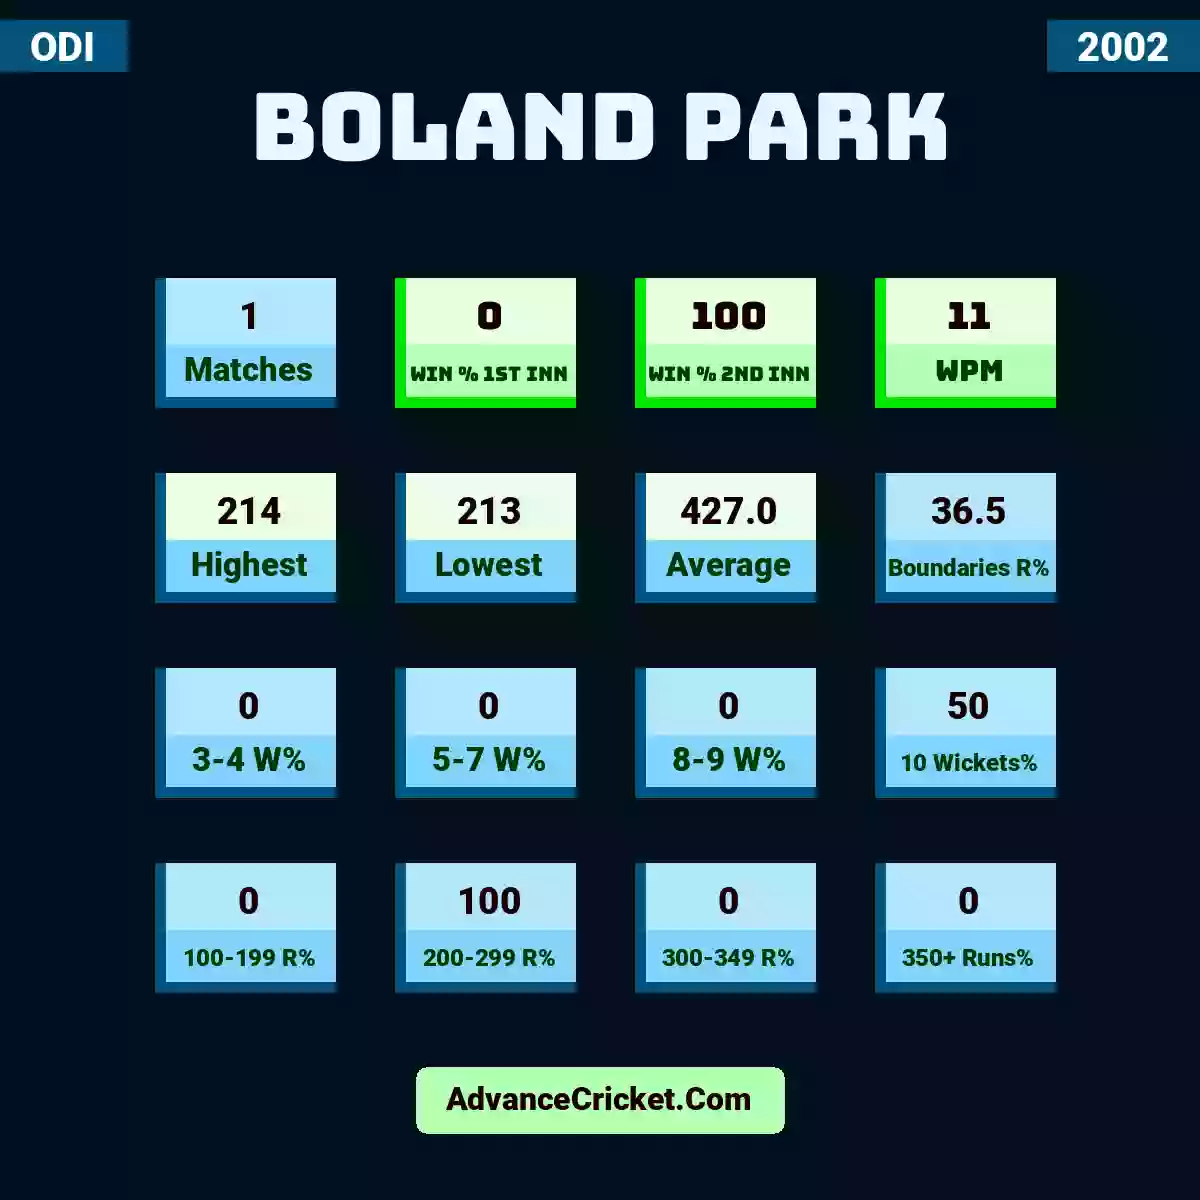 Image showing Boland Park with Matches: 1, Win % 1st Inn: 0, Win % 2nd Inn: 100, WPM: 11, Highest: 214, Lowest: 213, Average: 427.0, Boundaries R%: 36.5, 3-4 W%: 0, 5-7 W%: 0, 8-9 W%: 0, 10 Wickets%: 50, 100-199 R%: 0, 200-299 R%: 100, 300-349 R%: 0, 350+ Runs%: 0.